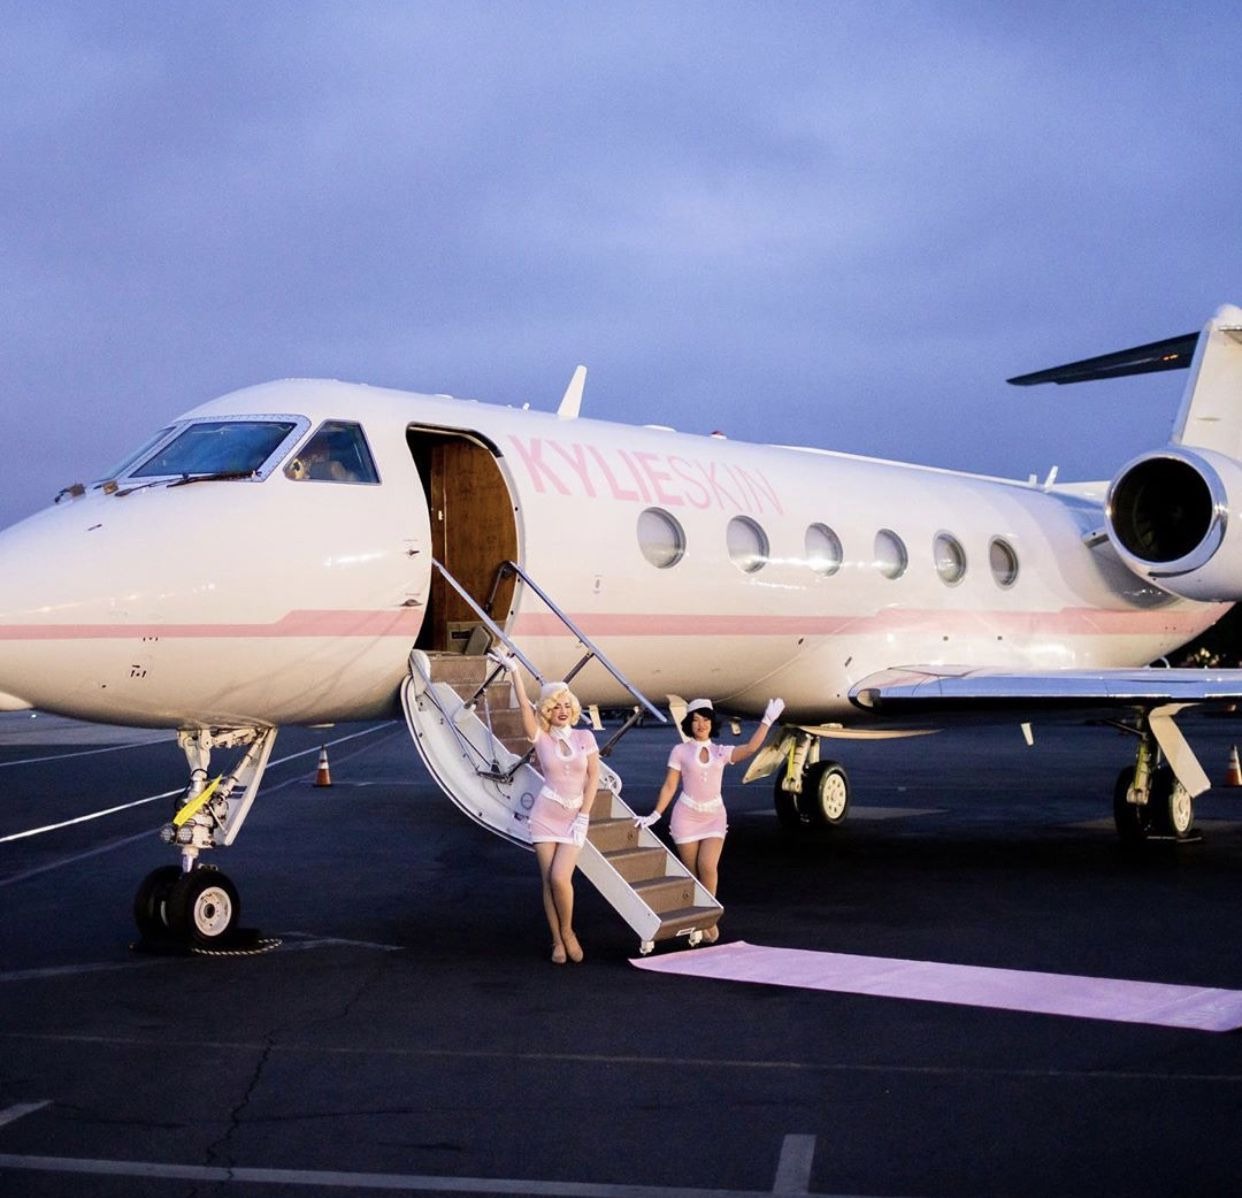 Get a Glimpse of Kylie Jenner's Incredible Private Jet!